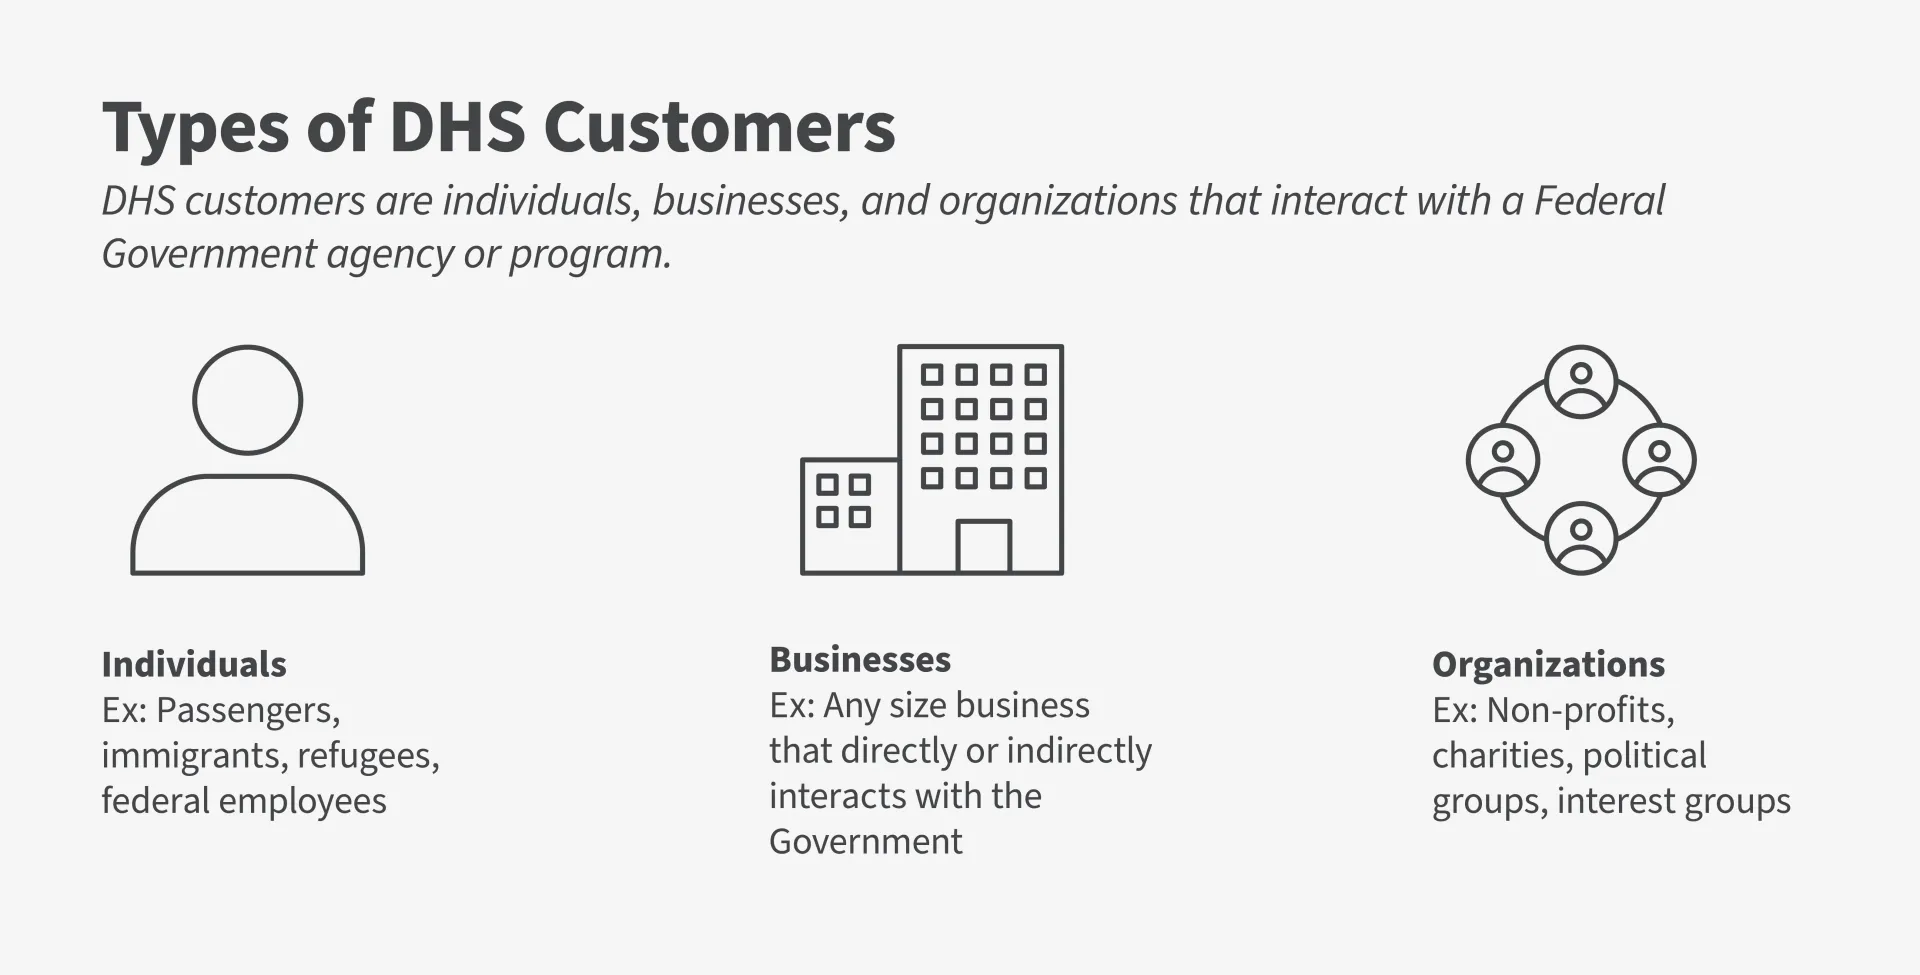 Infographic showing three icons that represent the types of DHS customers as individuals, businesses, and organizations.